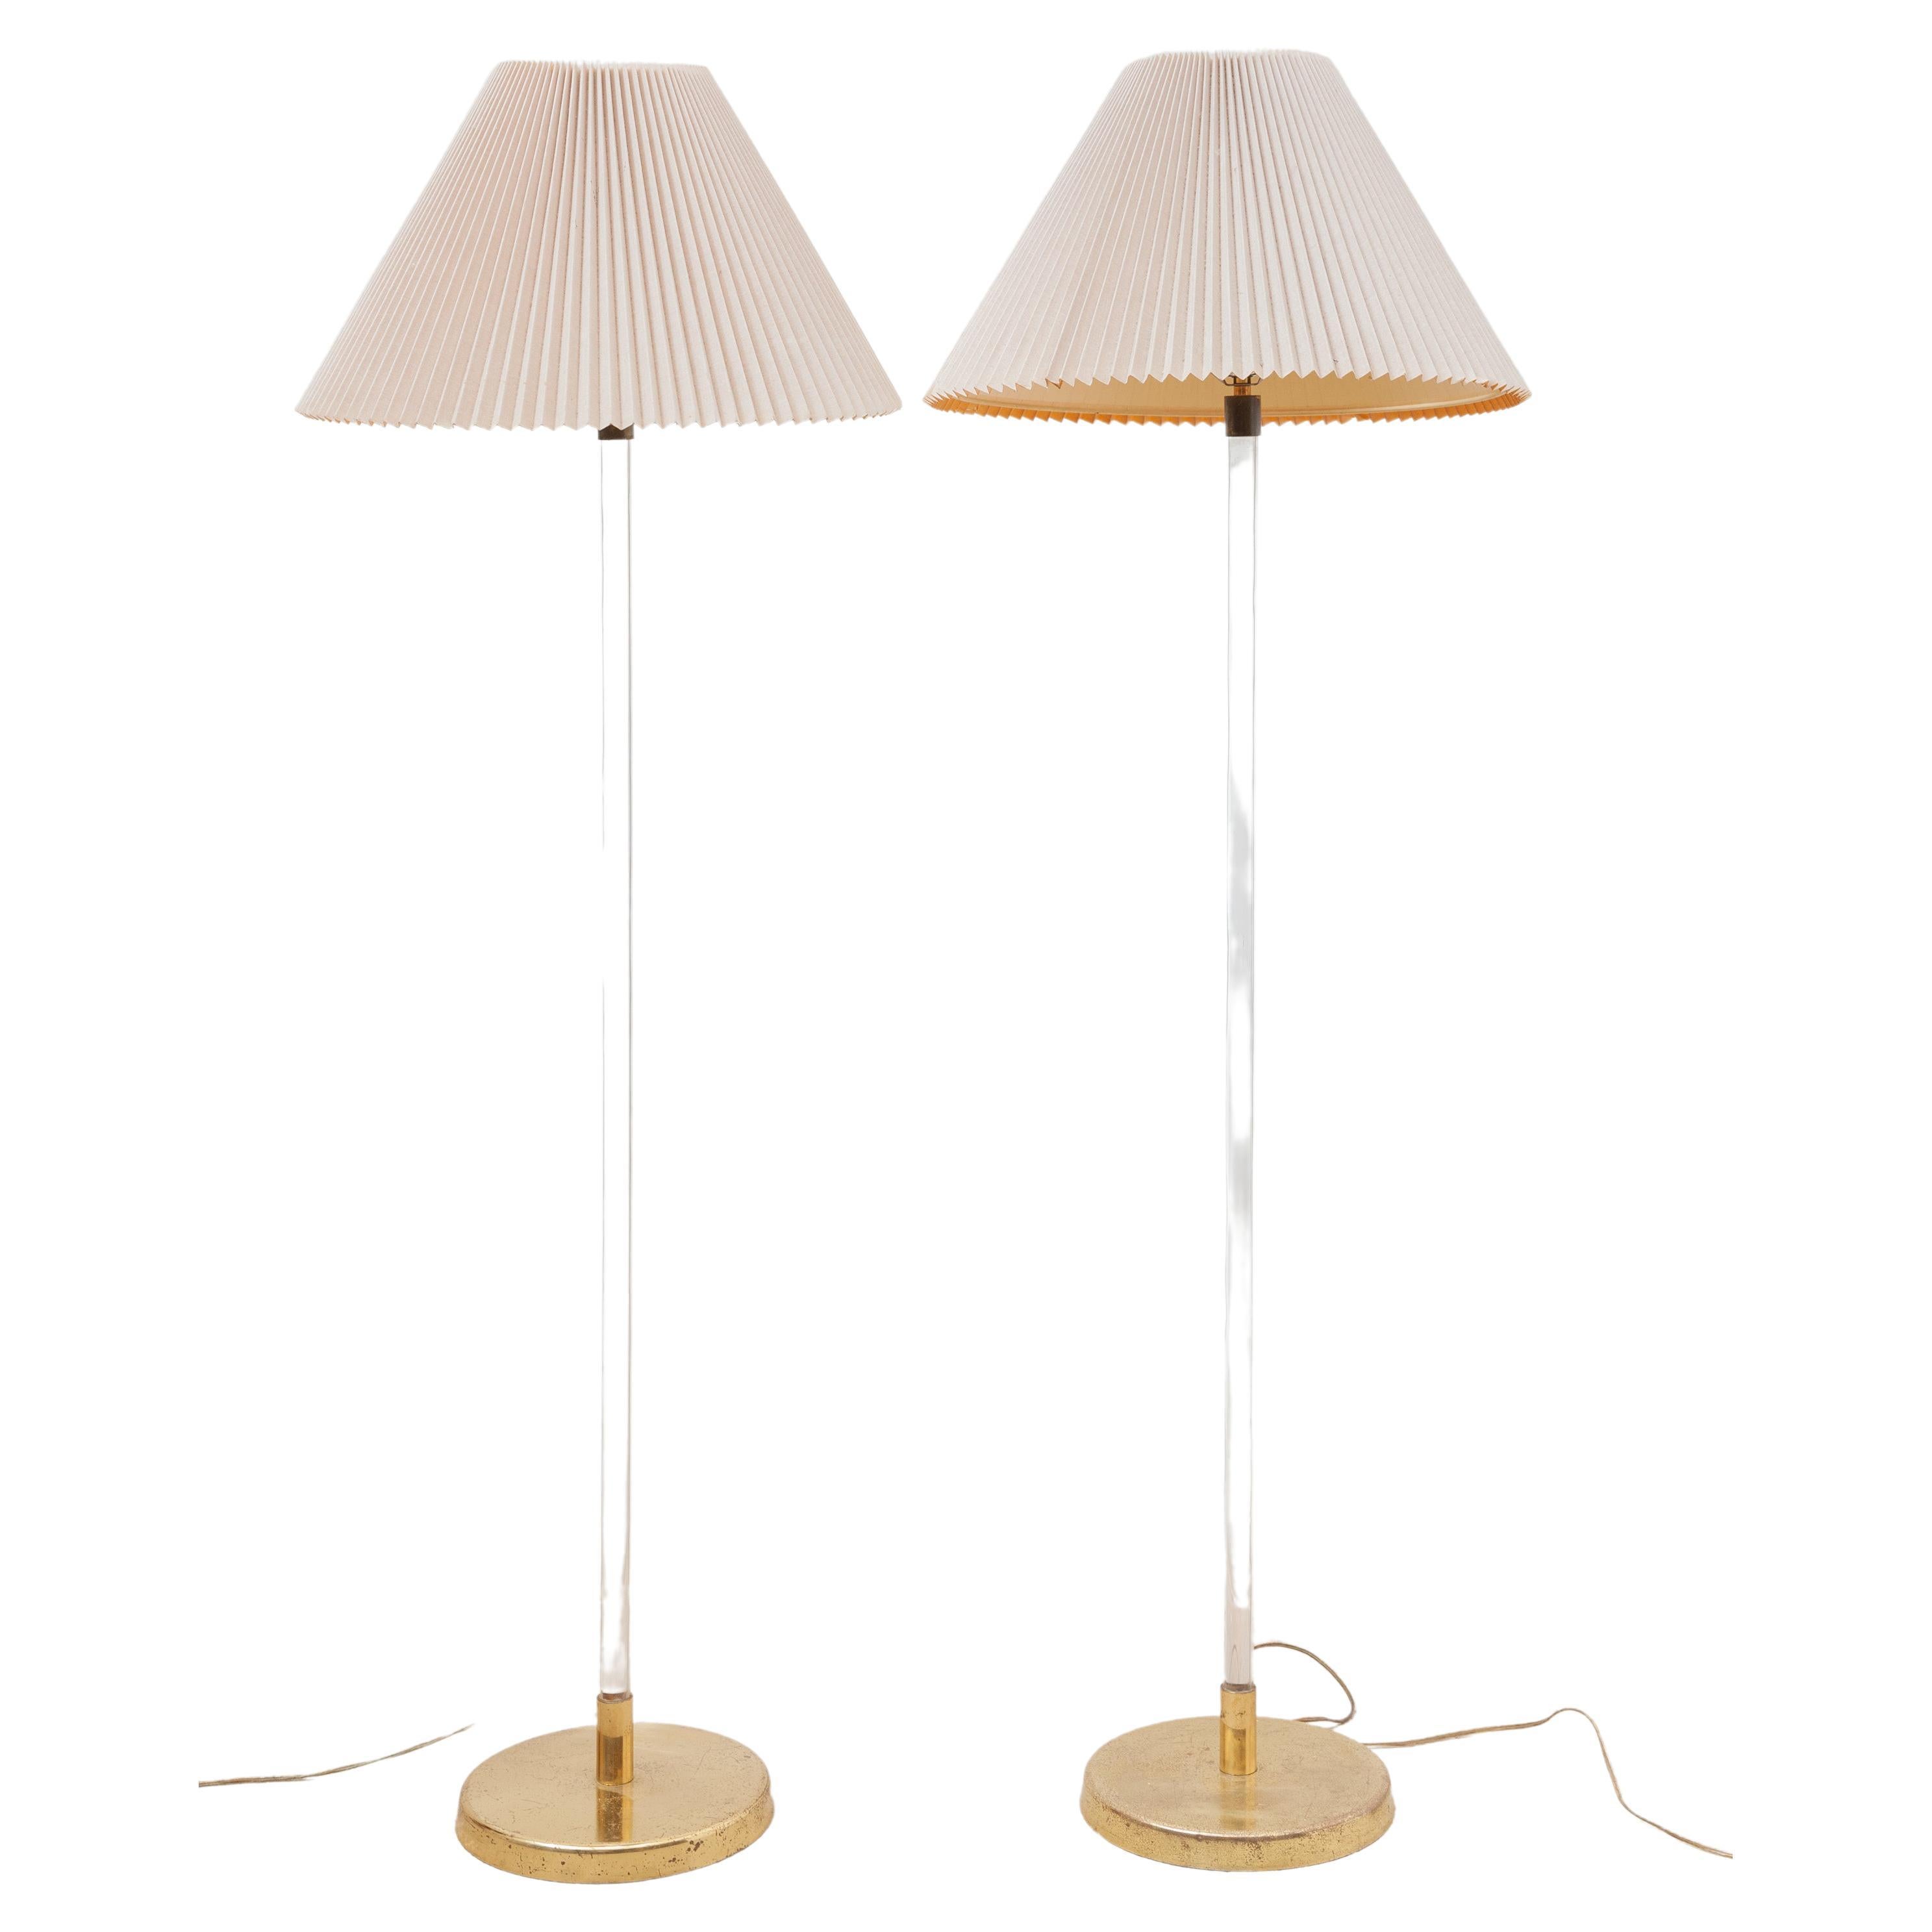 Set of Two Vintage Modern Pair of Clear Lucite Floor Lamps 1970s by Knoll